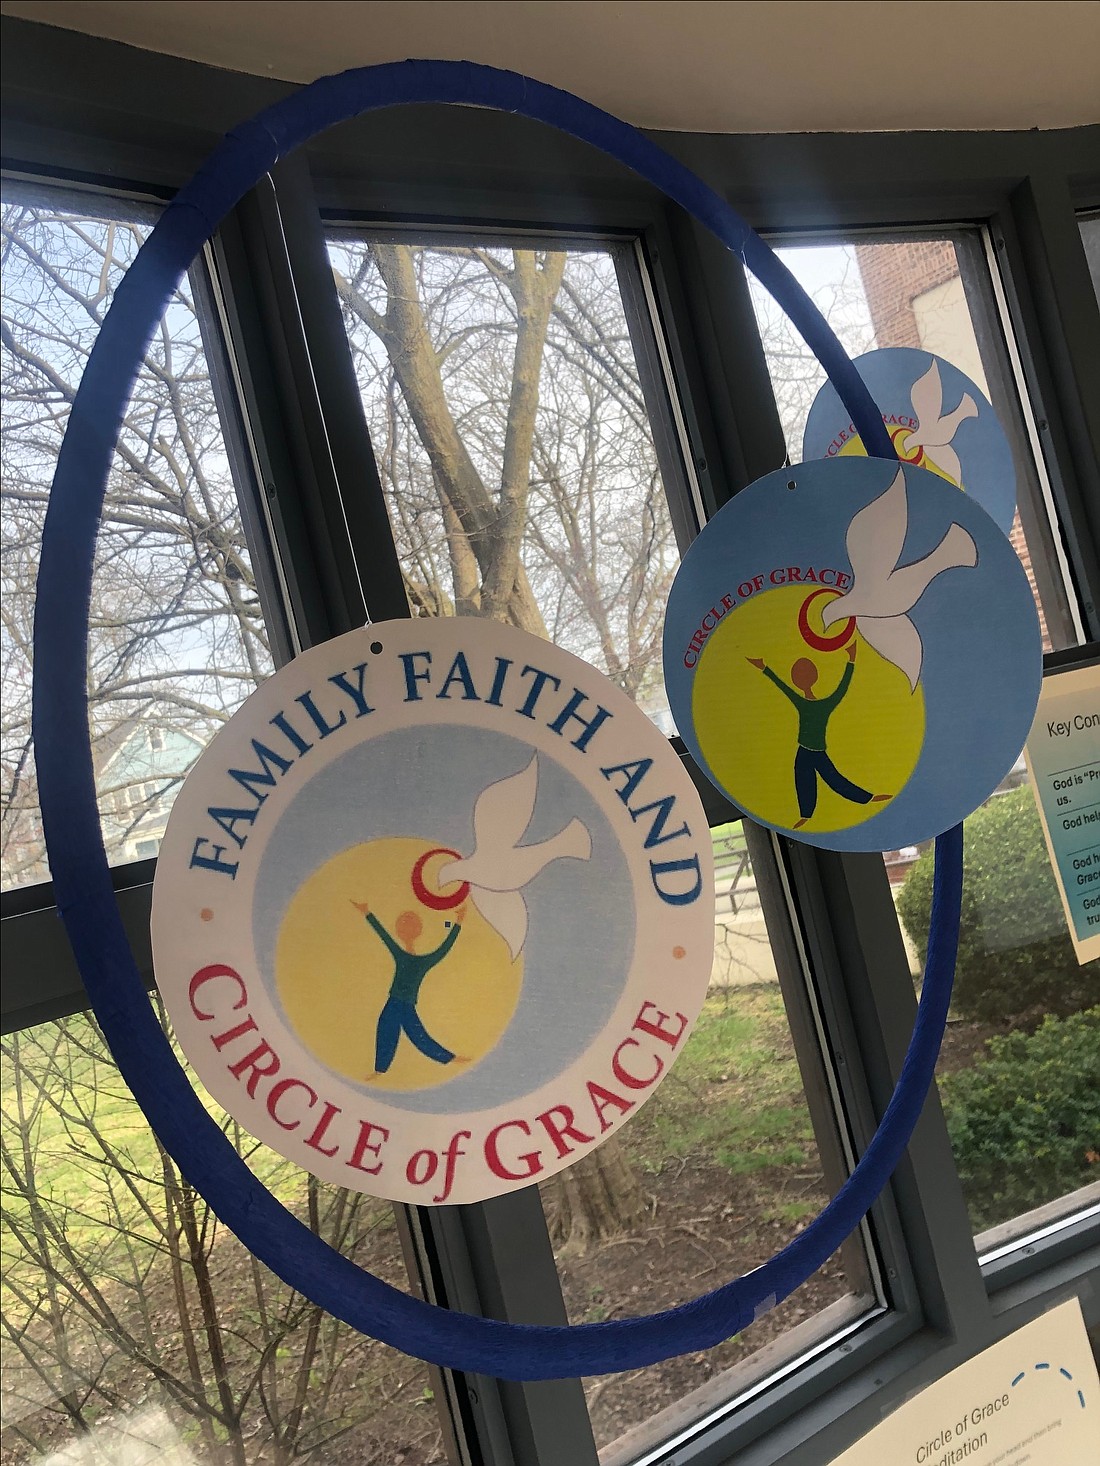 The Circle of Grace program was created and piloted in the Archdiocese of Omaha. Since 2007, more than 68 dioceses have successfully implemented the program. Circle of Grace is the program presently being used in every parish and school in the Albany Diocese.